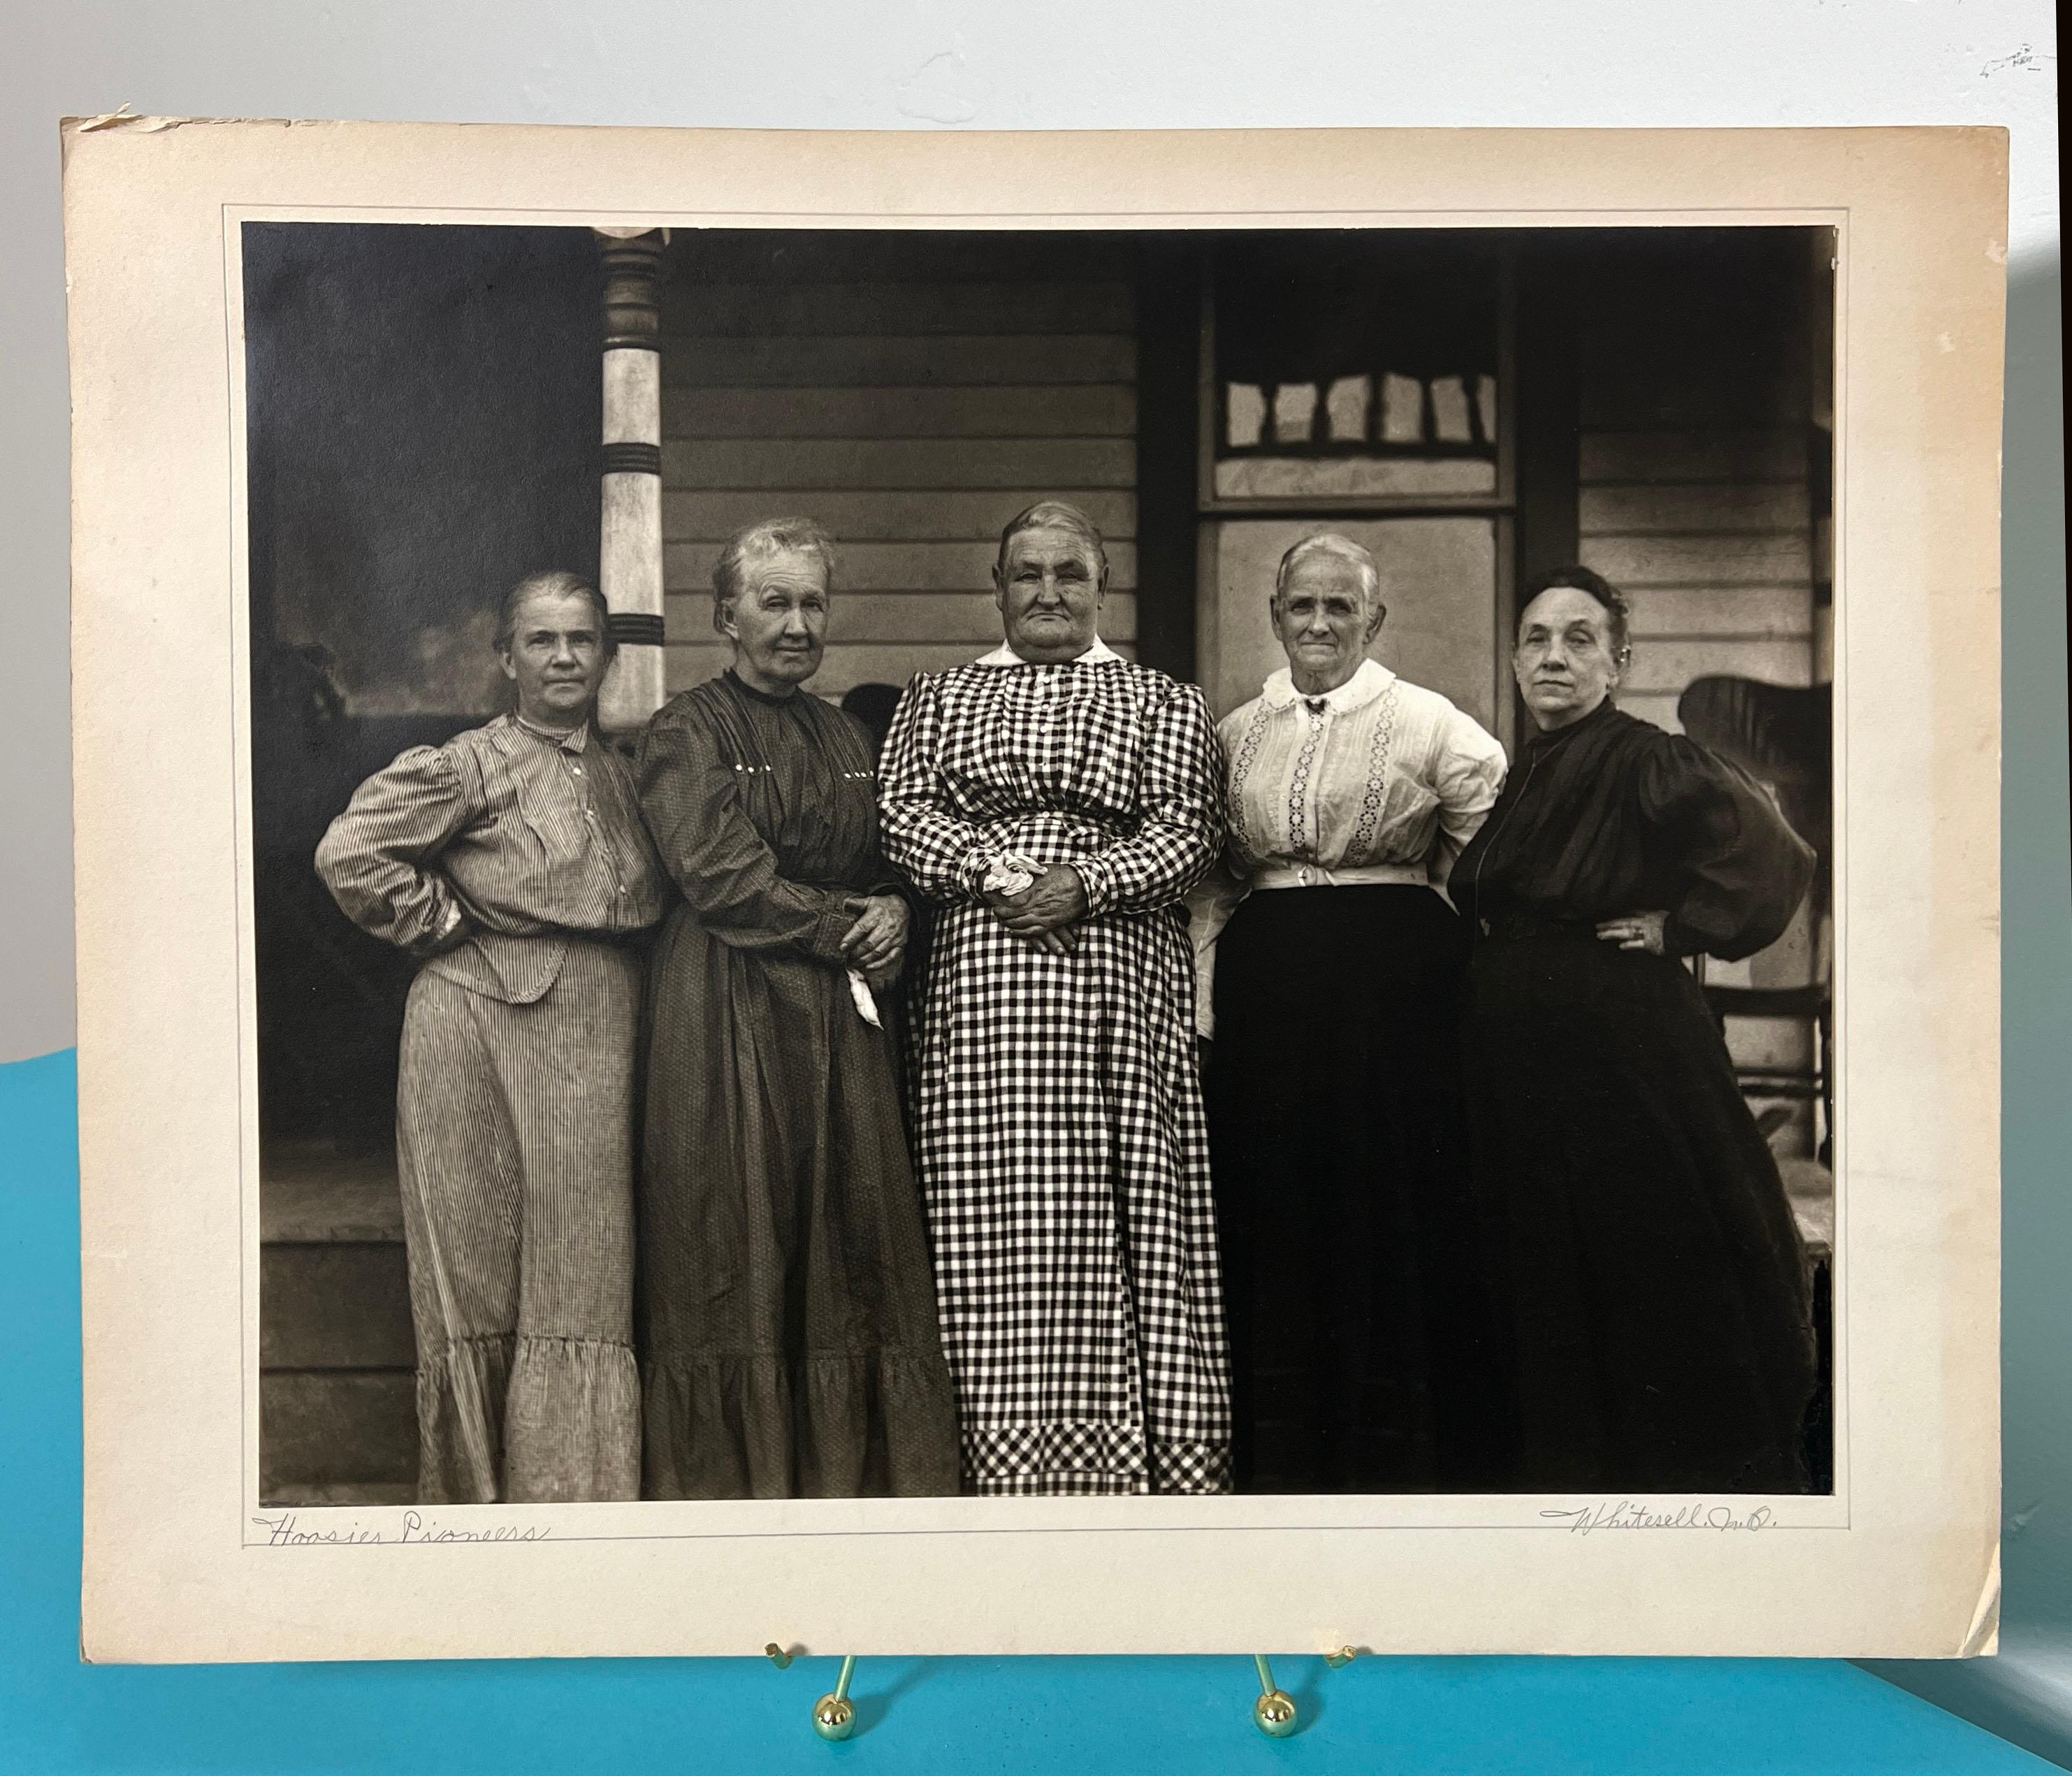 Silver gelatin large format print by the New Orleans photographer Joseph Woodson “Pops” Whitesell. Entitled “Hoosier Pioneers” it depicts the matriarchs of his Indiana heritage, ca. 1930s.